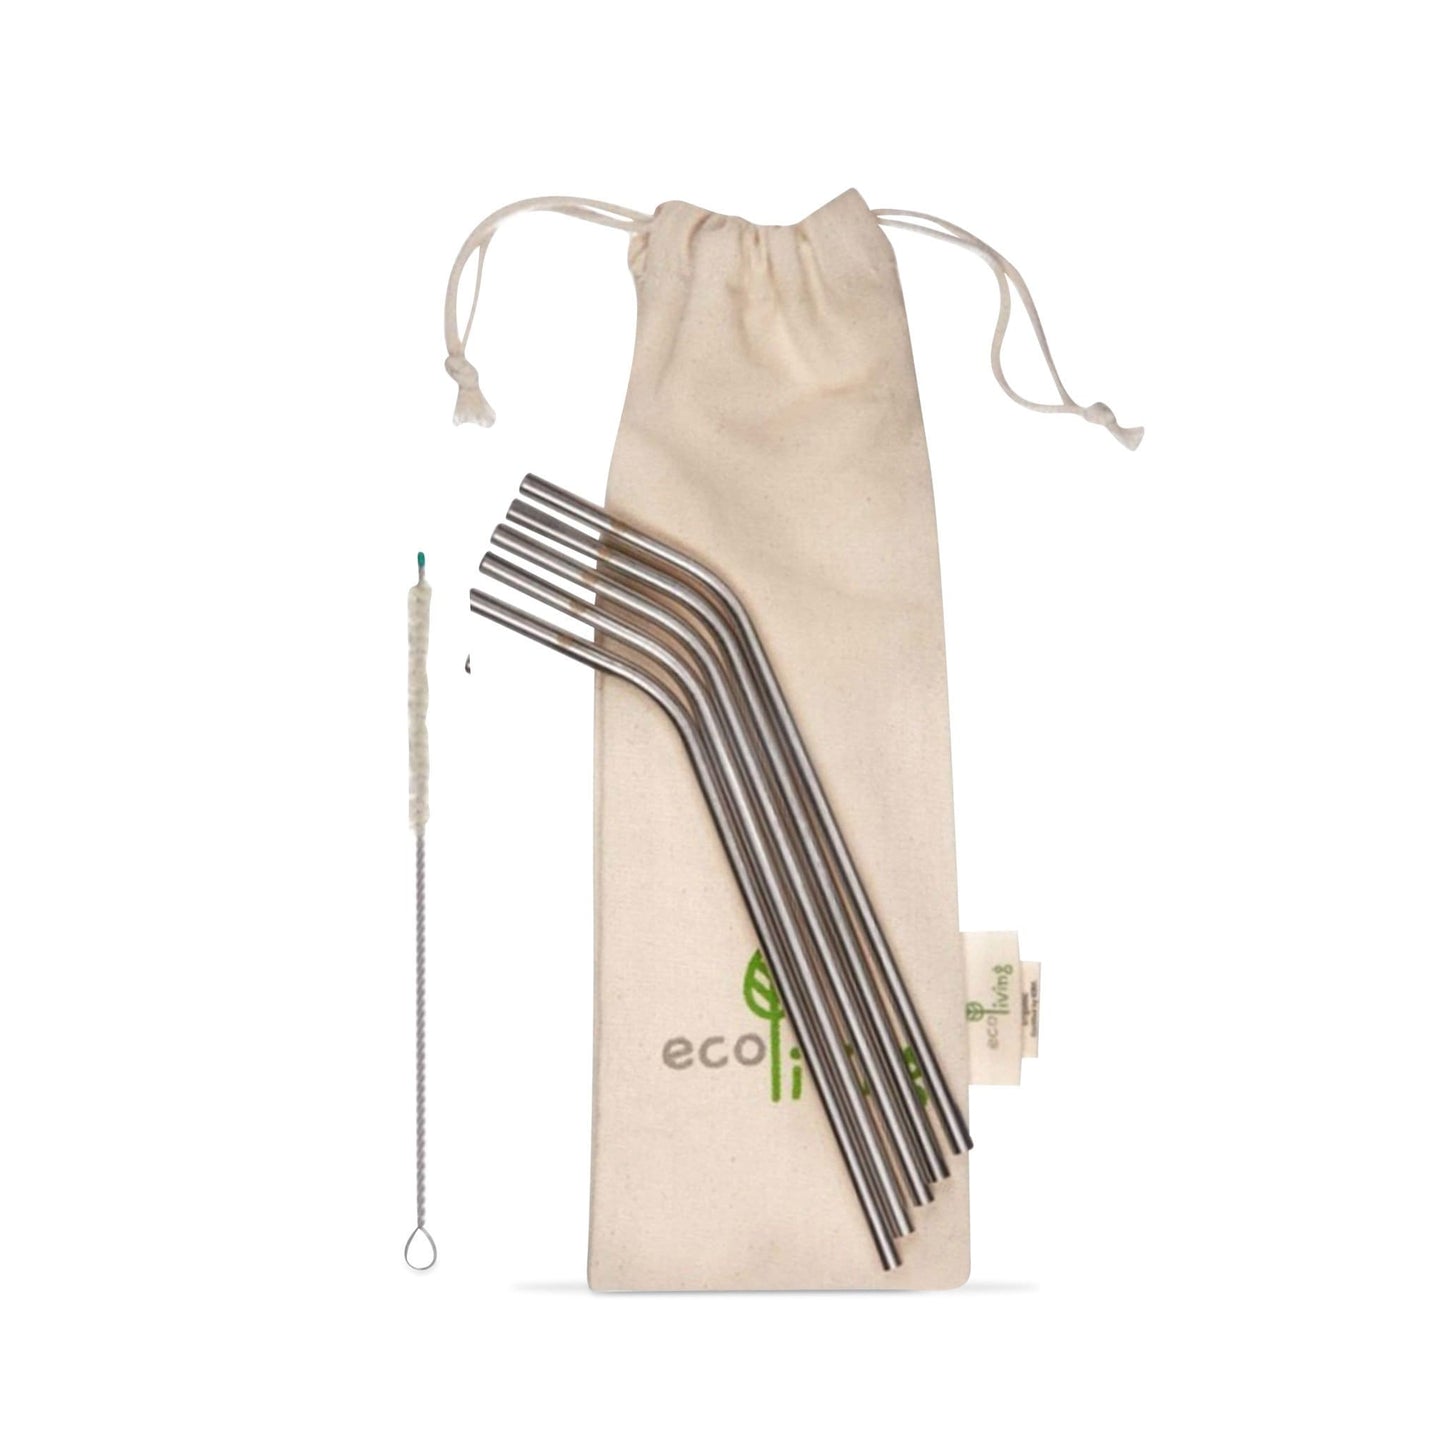 Faerly EcoLiving 5 Stainless Steel Bent Drinking Straws with Plastic-Free Cleaning Brush & Organic Carry Pouch